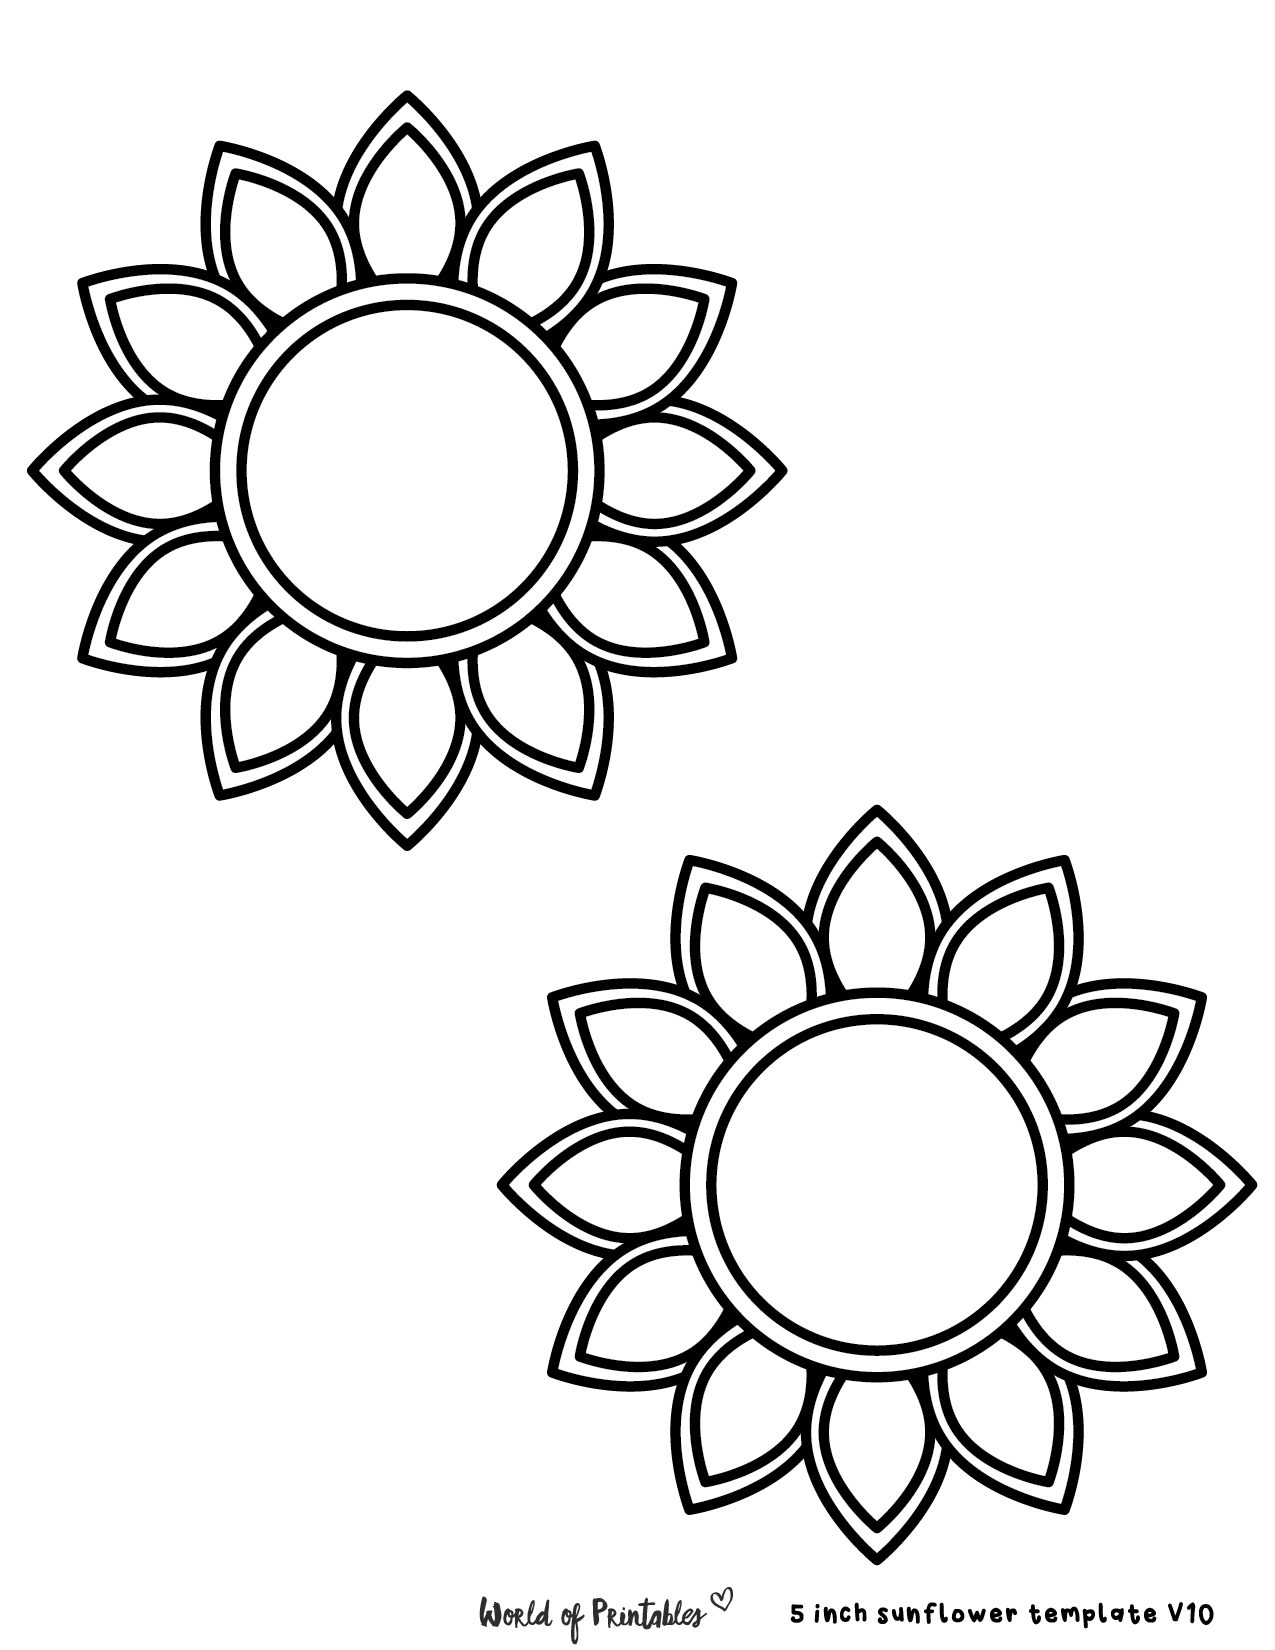 Free Printable Paper Sunflower Template